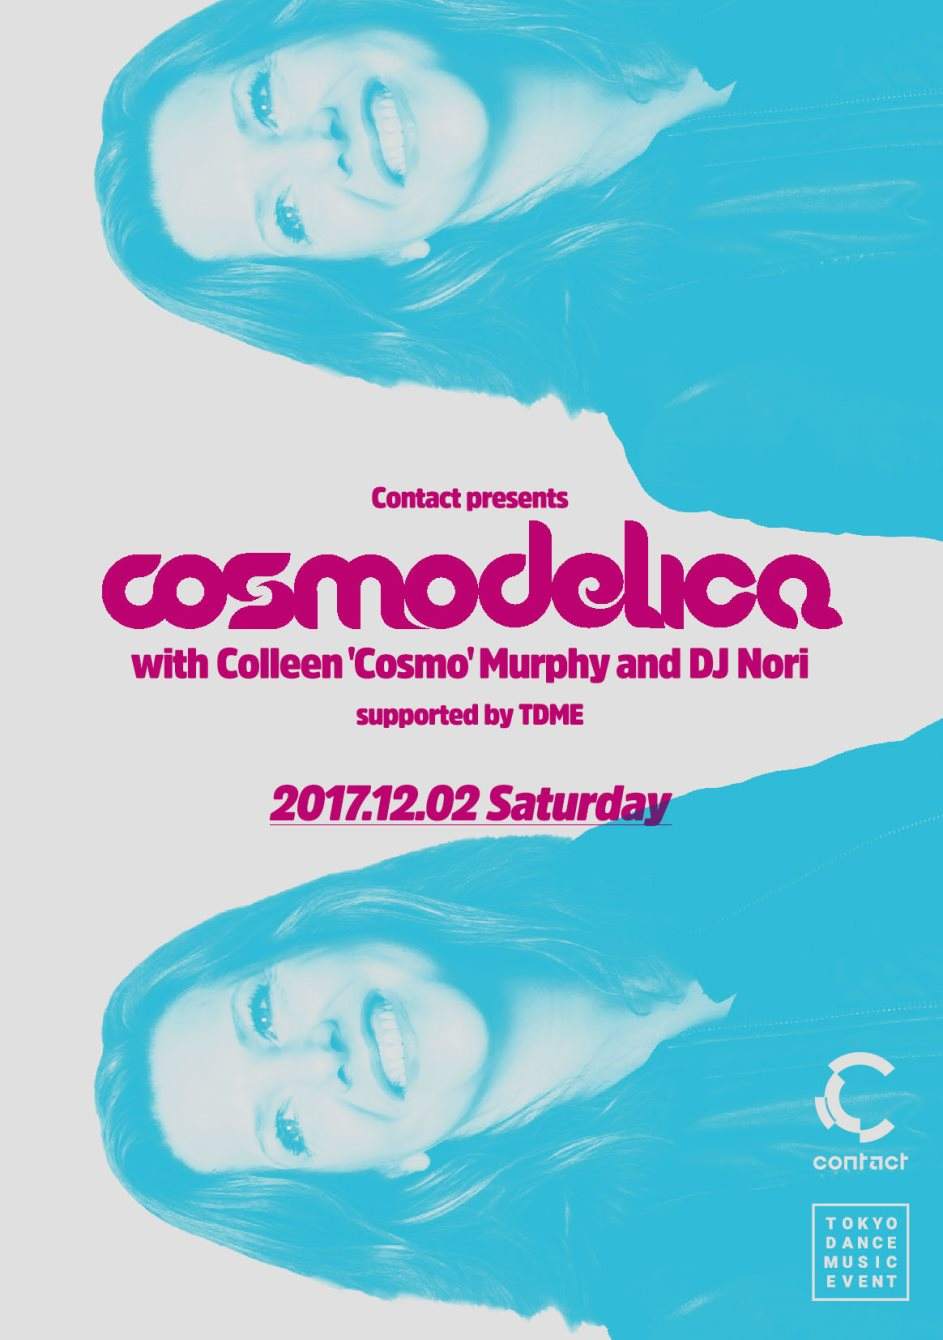 Contact presents Cosmodelica with Colleen 'Cosmo' Murphy and DJ Nori Supported by Tdme - フライヤー表